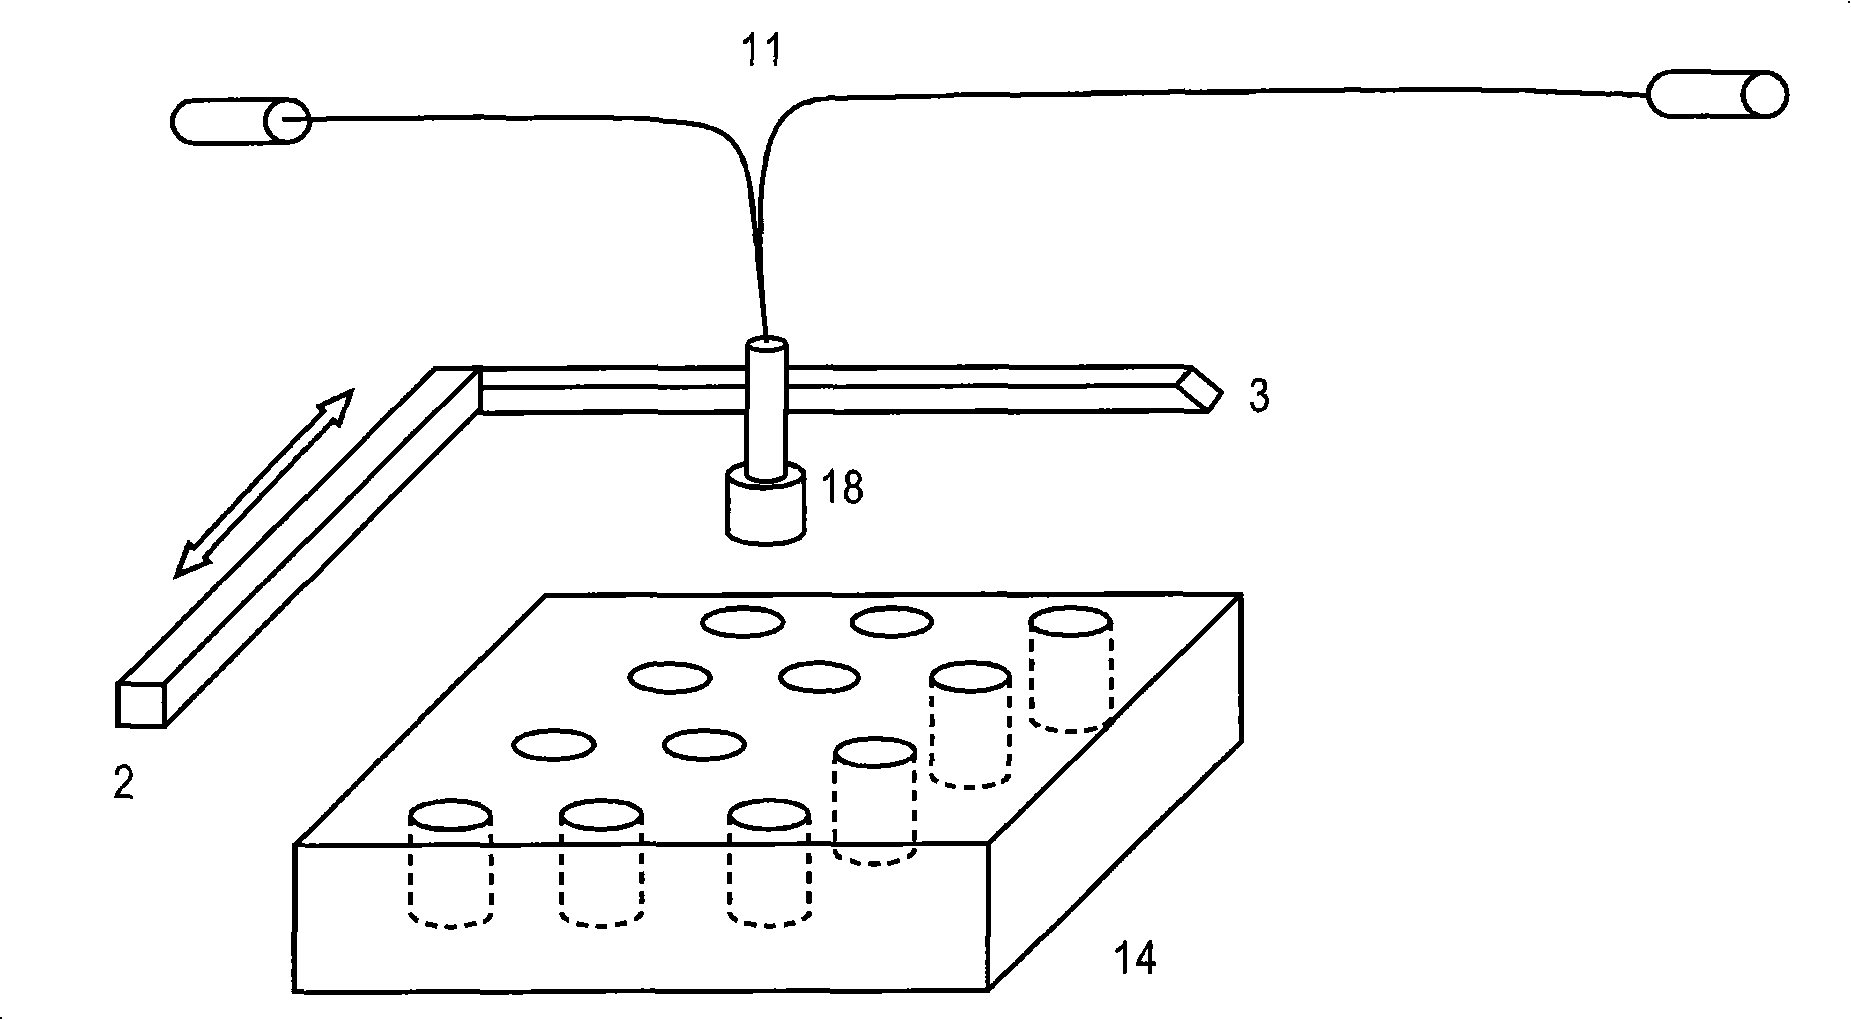 Analytical multi-spectral optical detection system